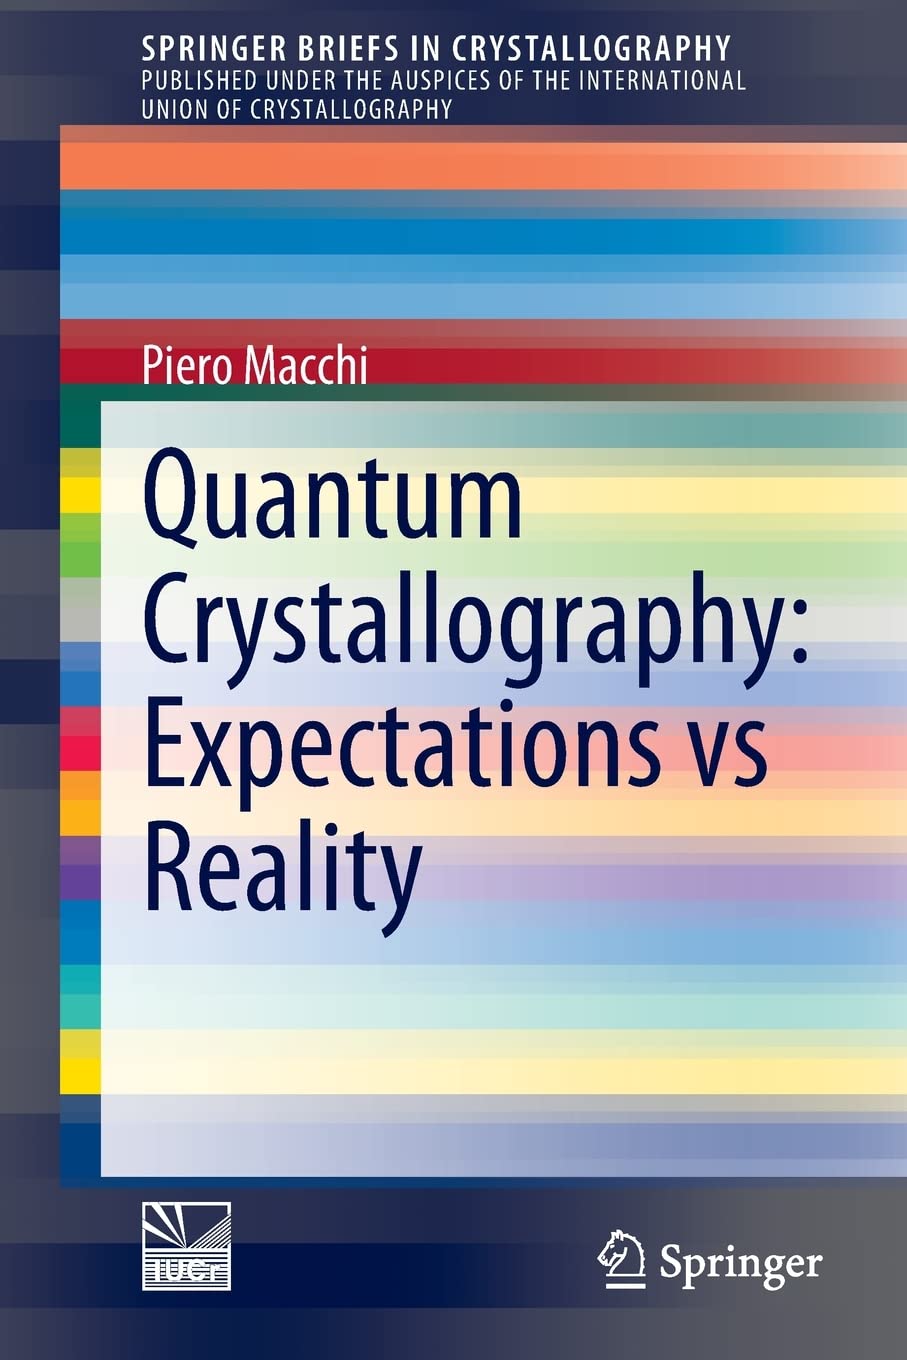 QUANTUM CRYSTALLOGRAPHY: EXPECTATIONS VS REALITY